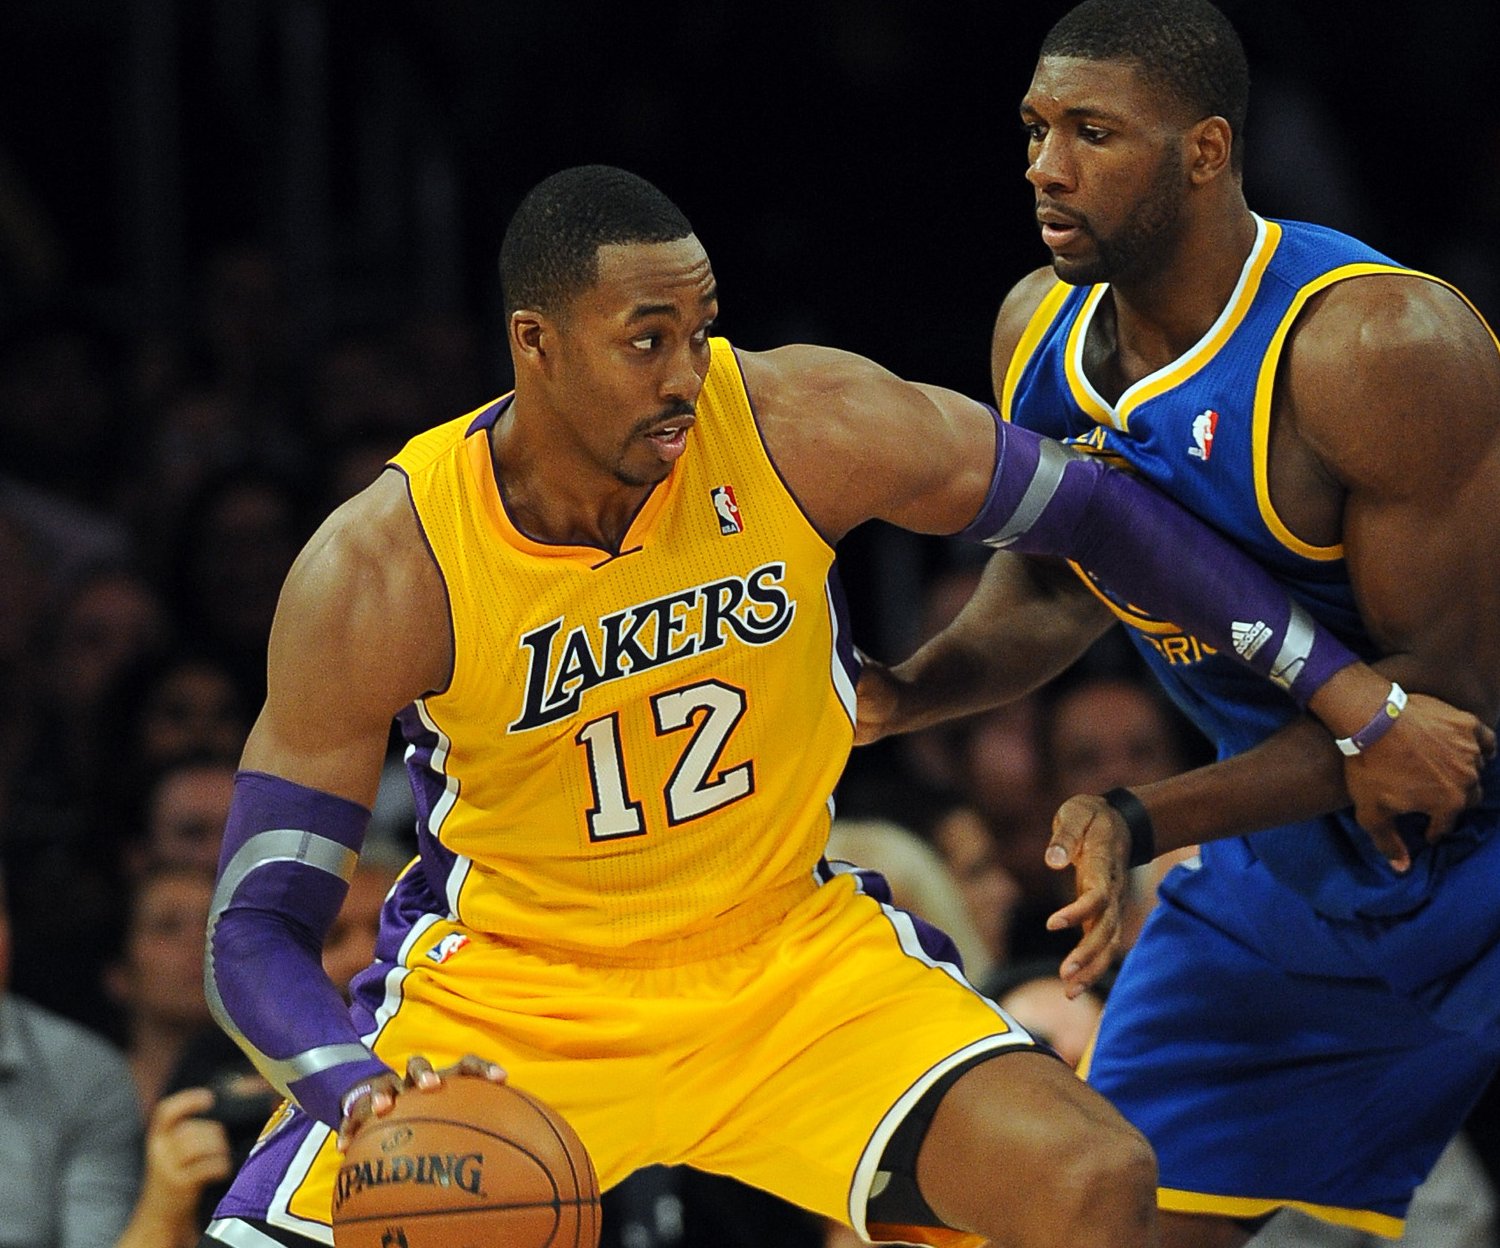 Warriors' Playoff Success Opens Door for Dwight Howard Signing in Free